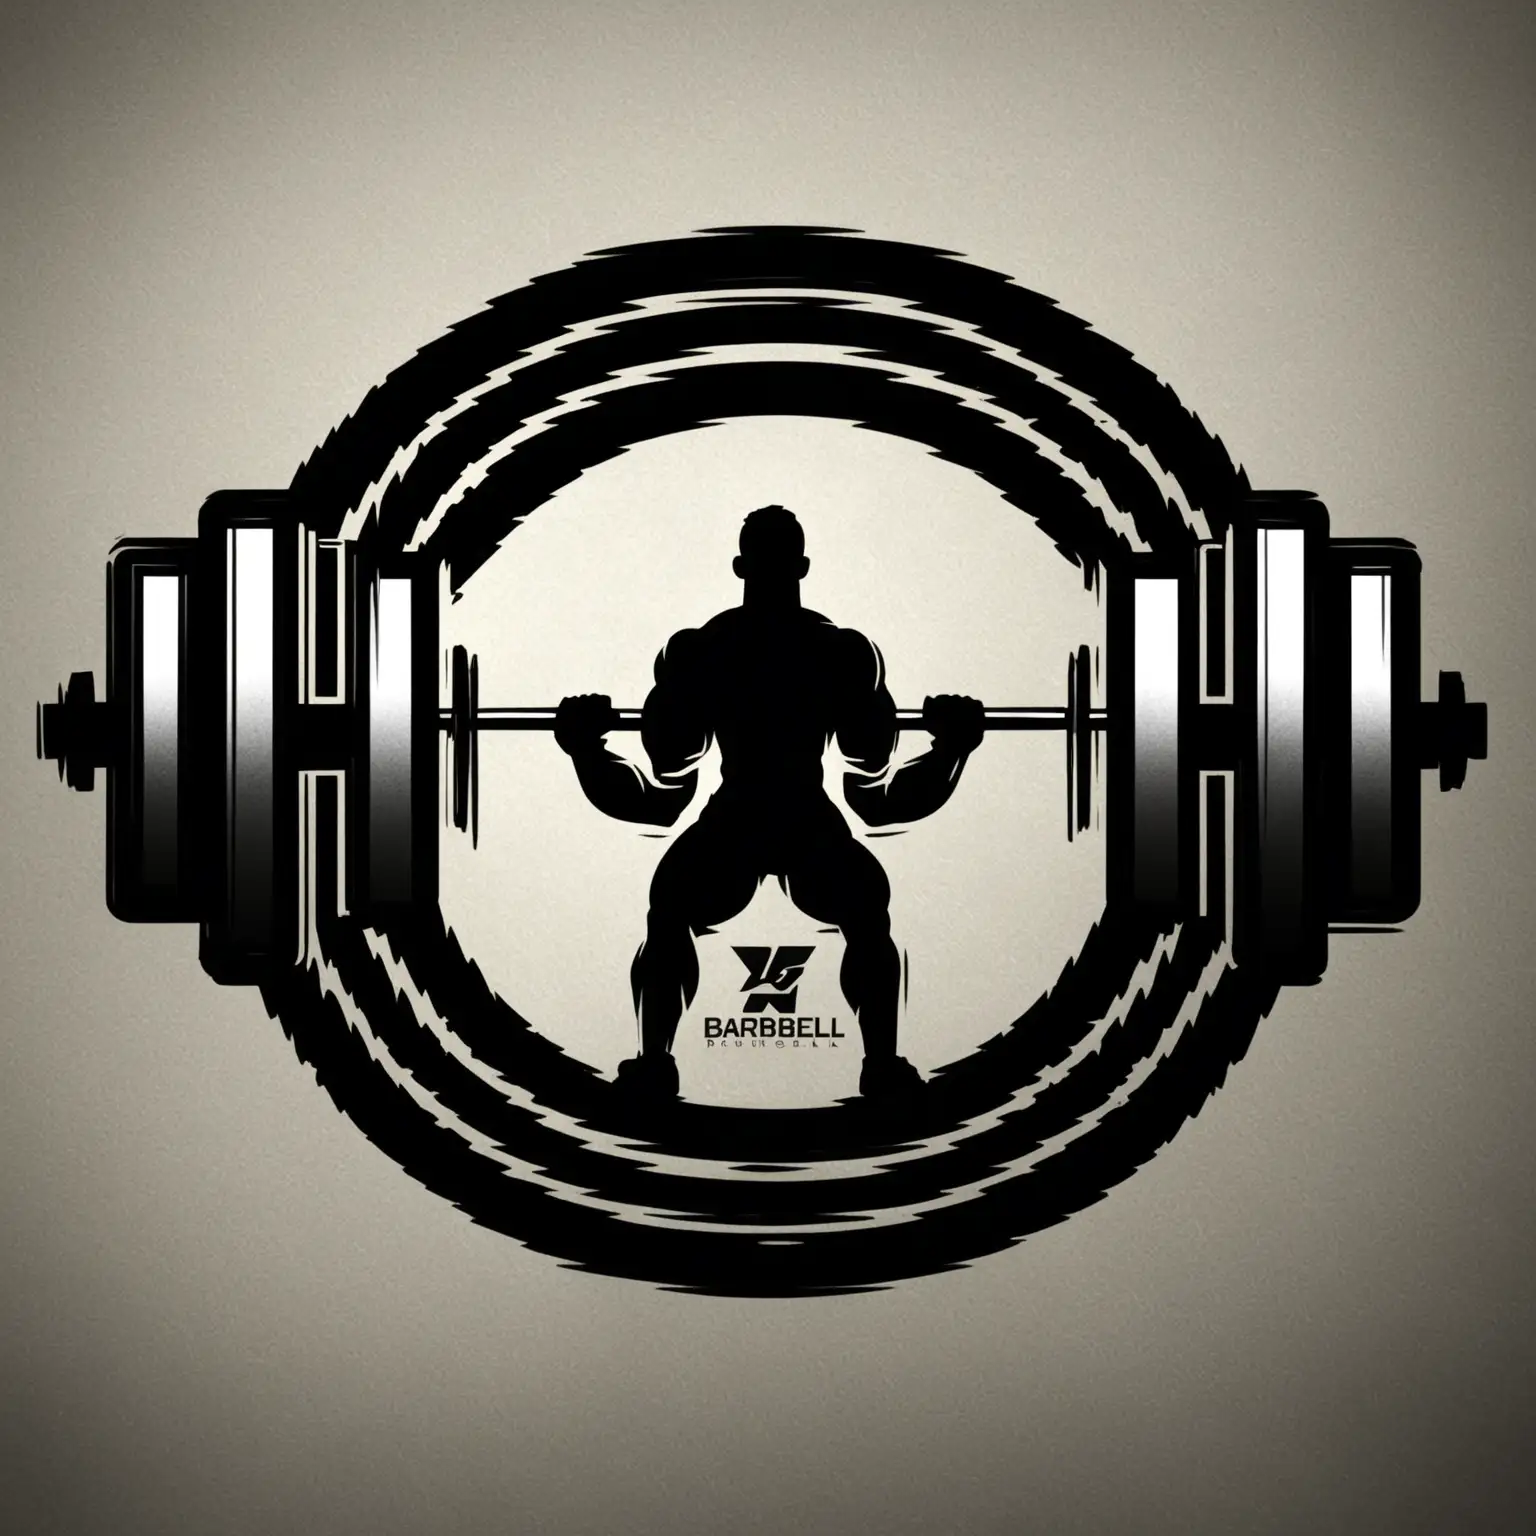 Inviting Barbell Logo for Fitness Enthusiasts Uncertain about Gym Atmosphere